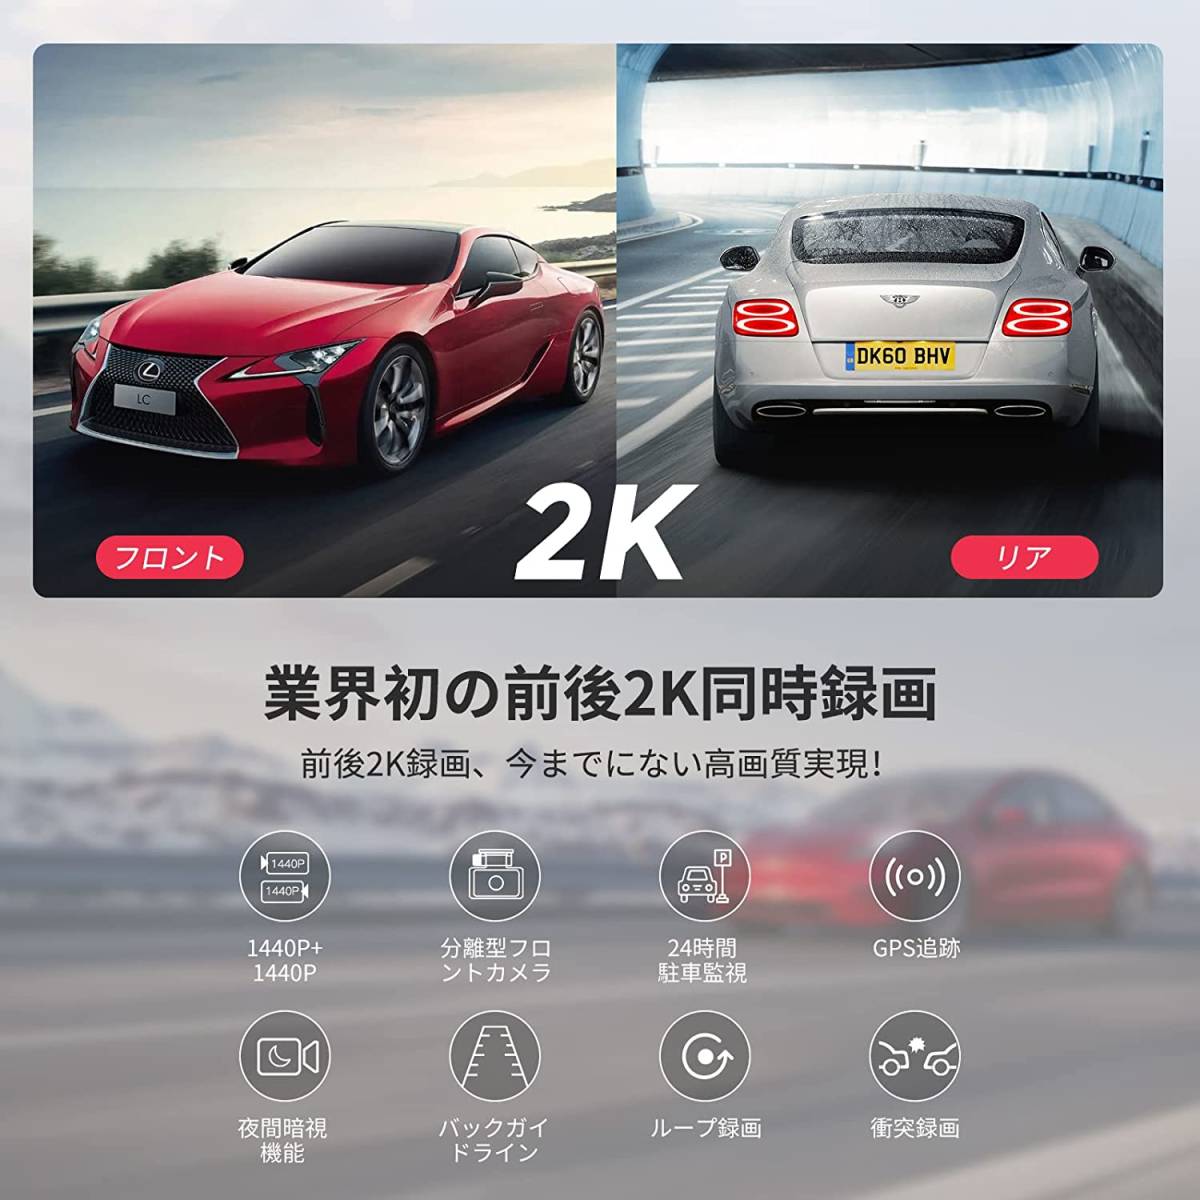  drive recorder mirror type separation 2K+2K.[11.26 -inch large screen + rom and rear (before and after) camera complete separation type ] 64GB high speed SD card attaching left right image reversal possibility 